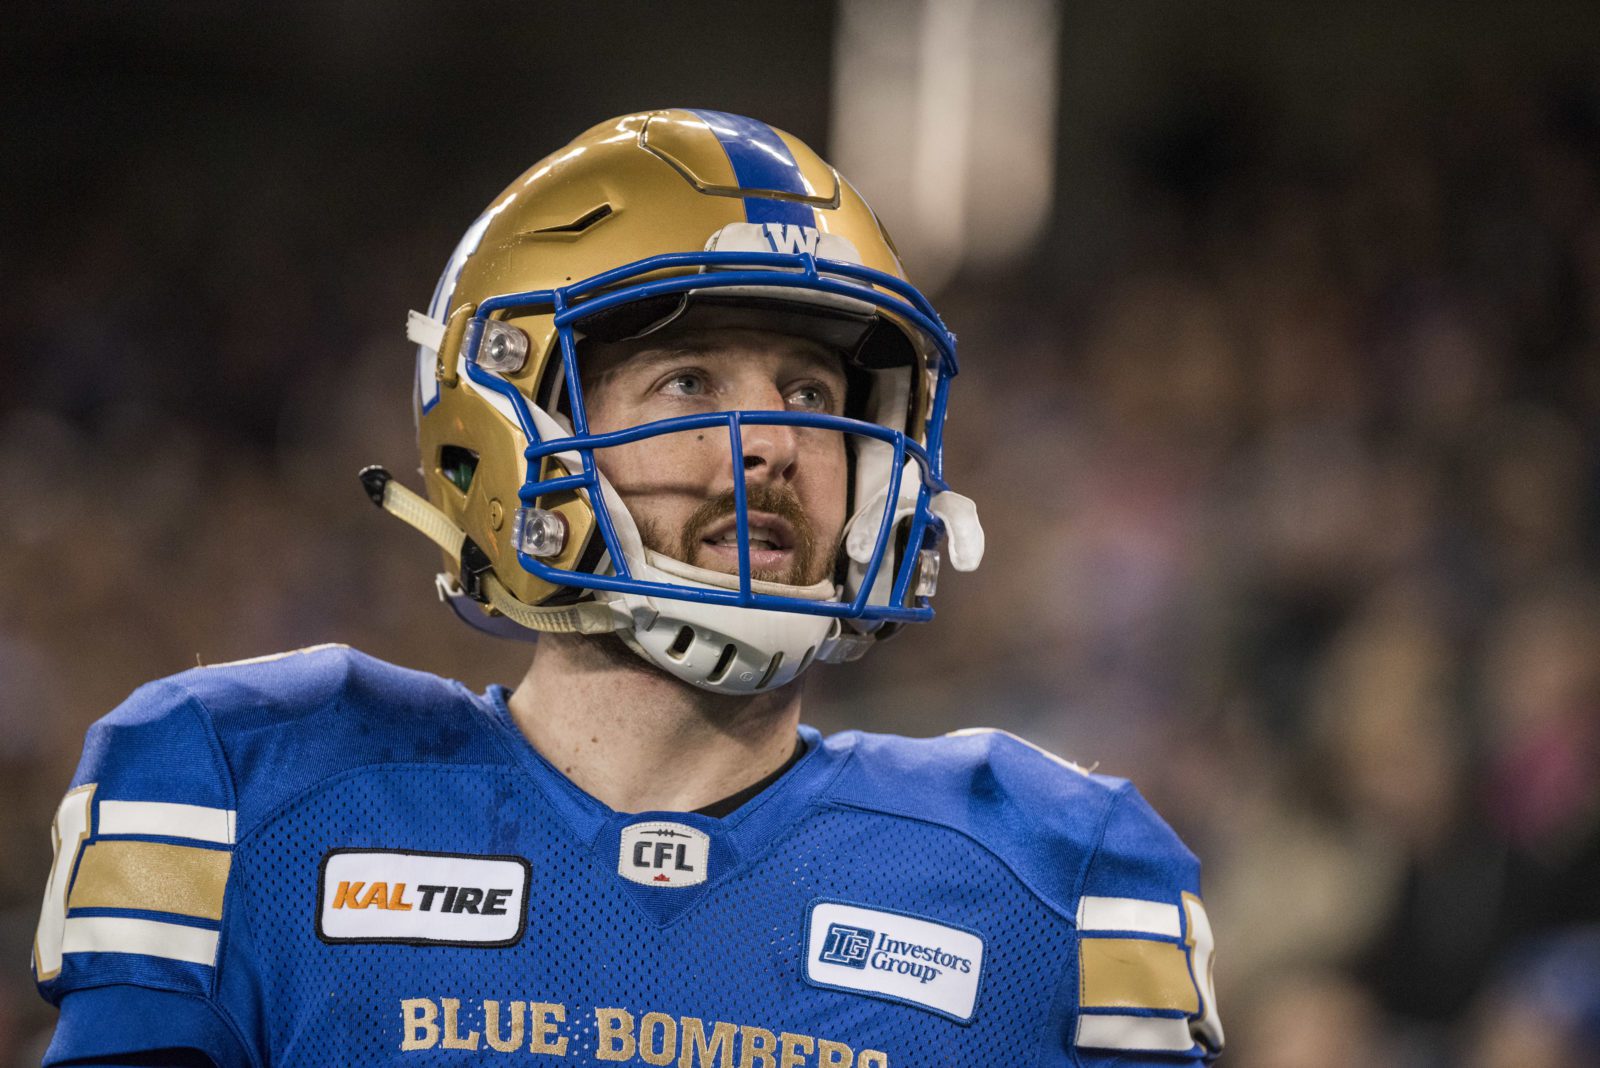 Matt Nichols was off his game on Friday night in Hamilton as the Bombers lost for the first time in 2019.